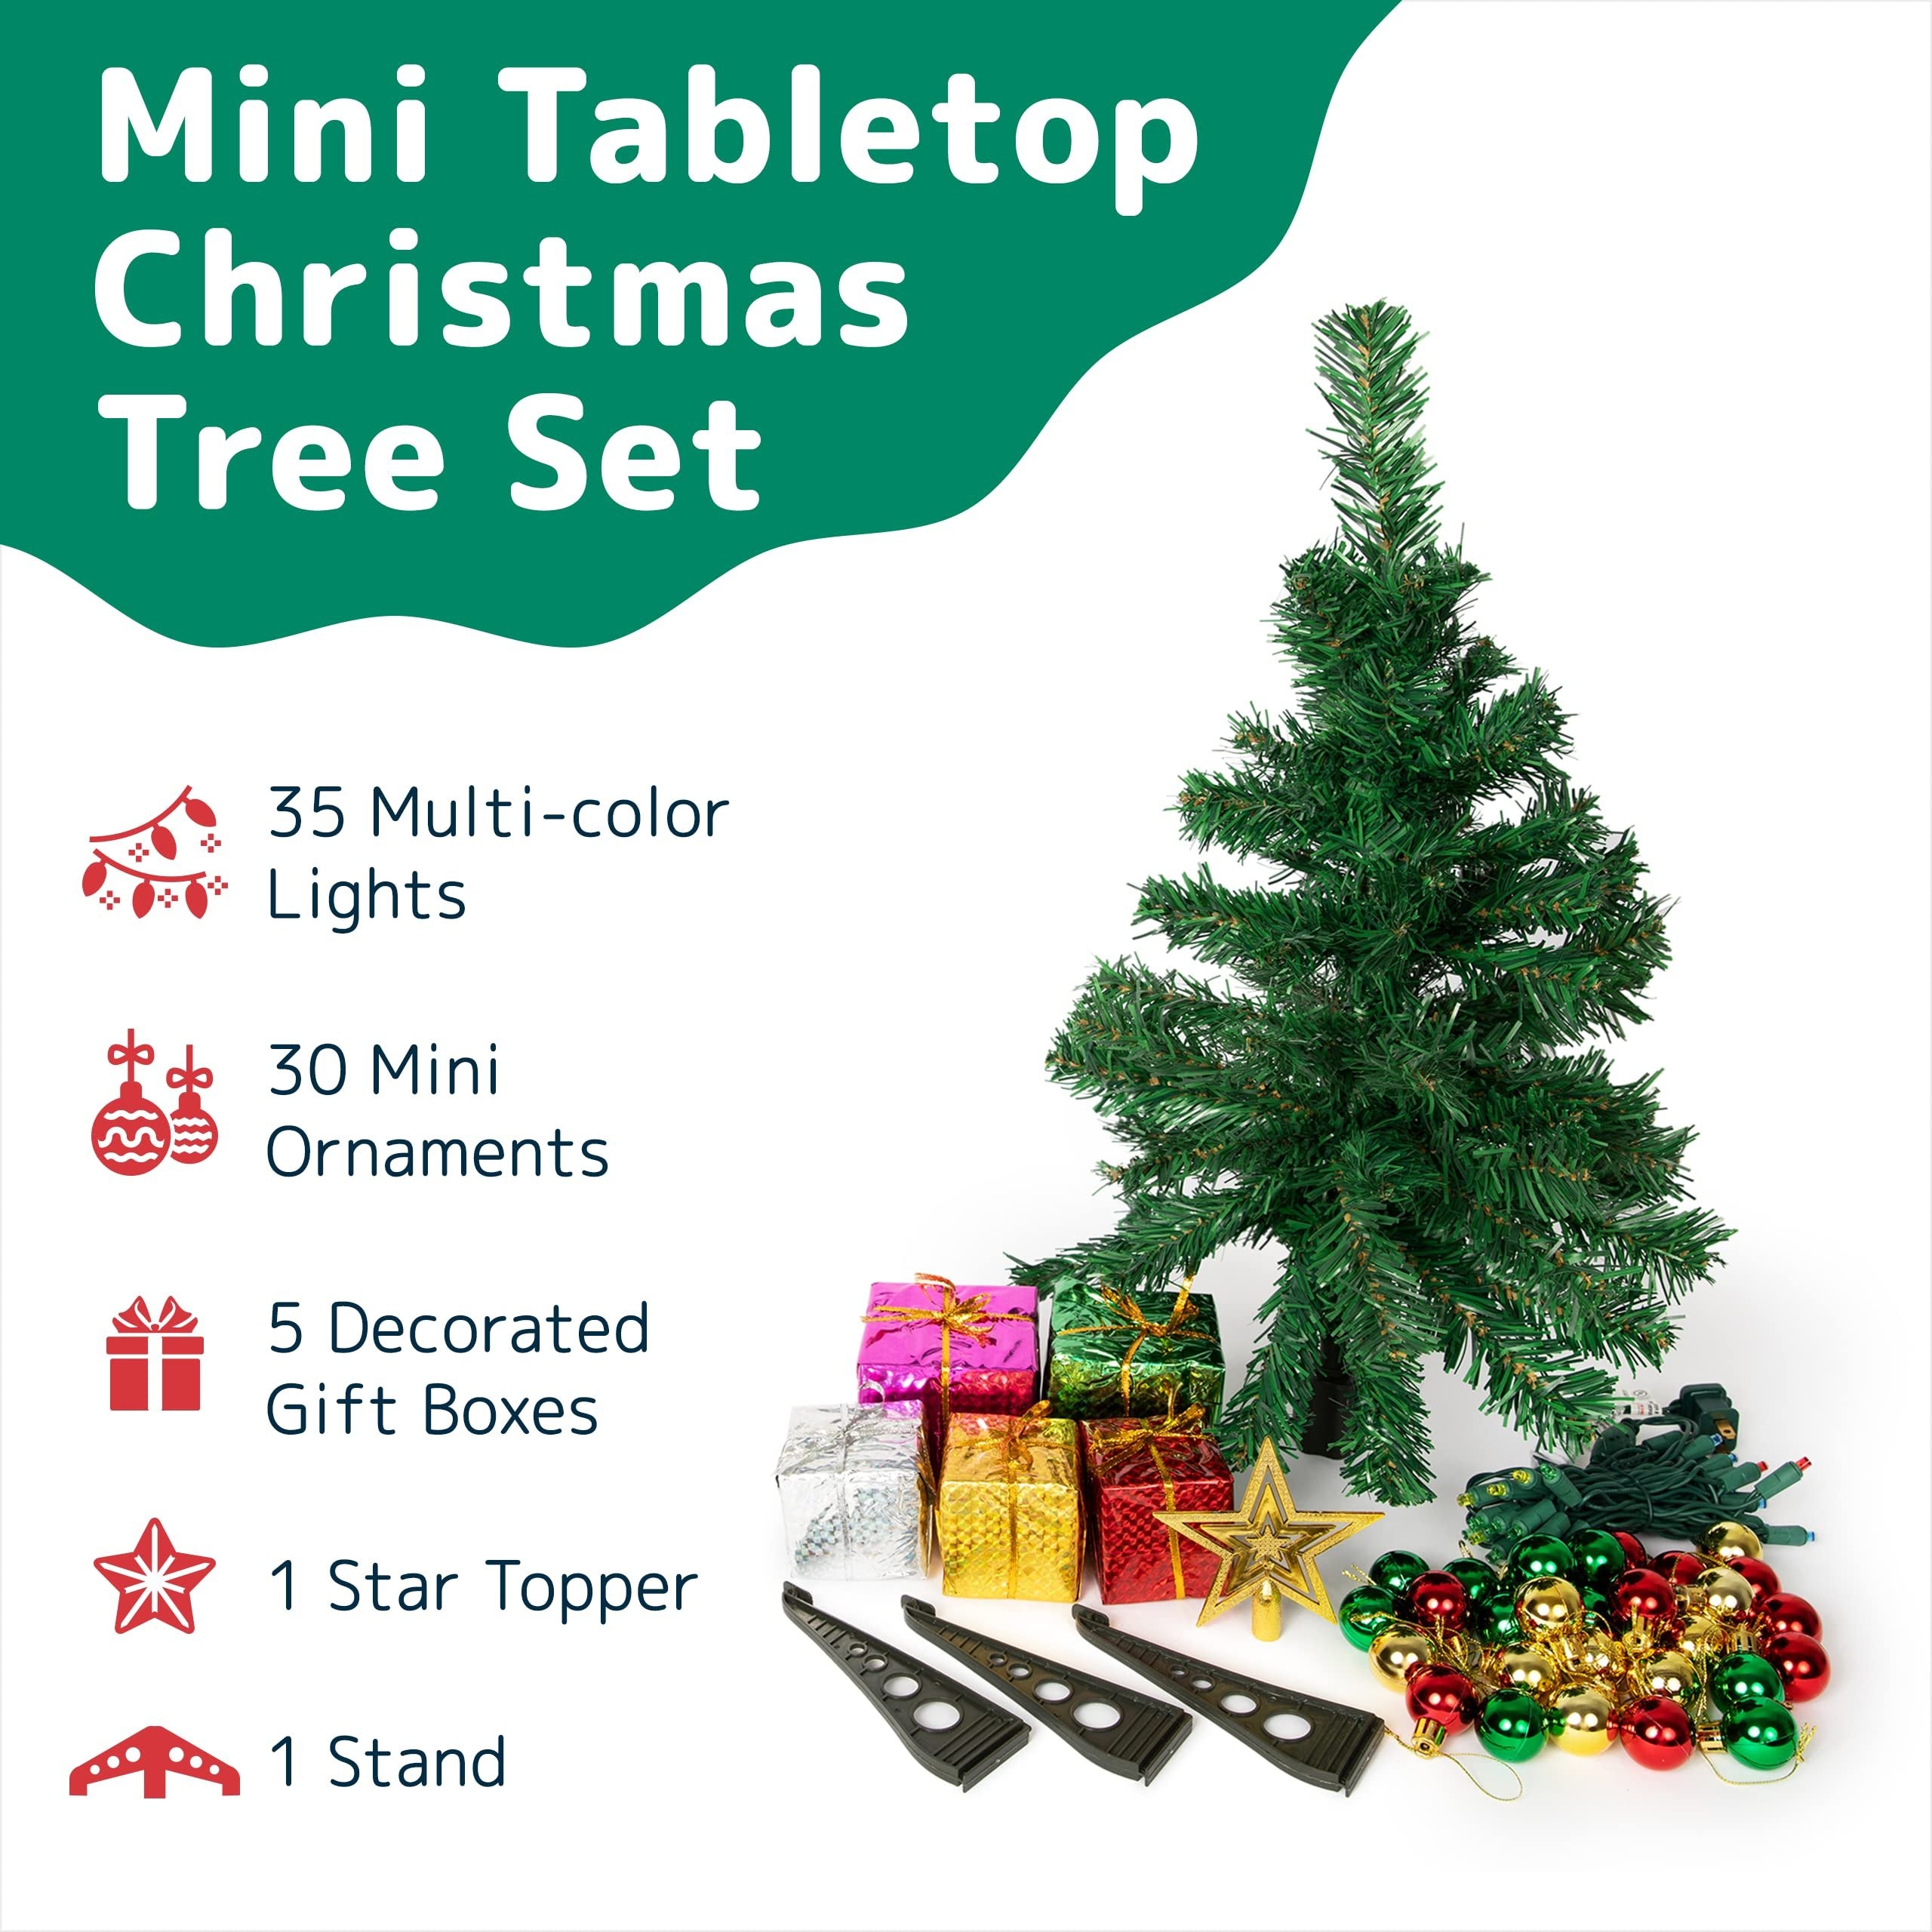 23-Inch Mini White Christmas Tree with Warm-White LED Lights - Small White Christmas Tree with Lights - DIY Tabletop Little Christmas Tree with Star Treetop, Decorated Gift Boxes, & Hanging Ornaments